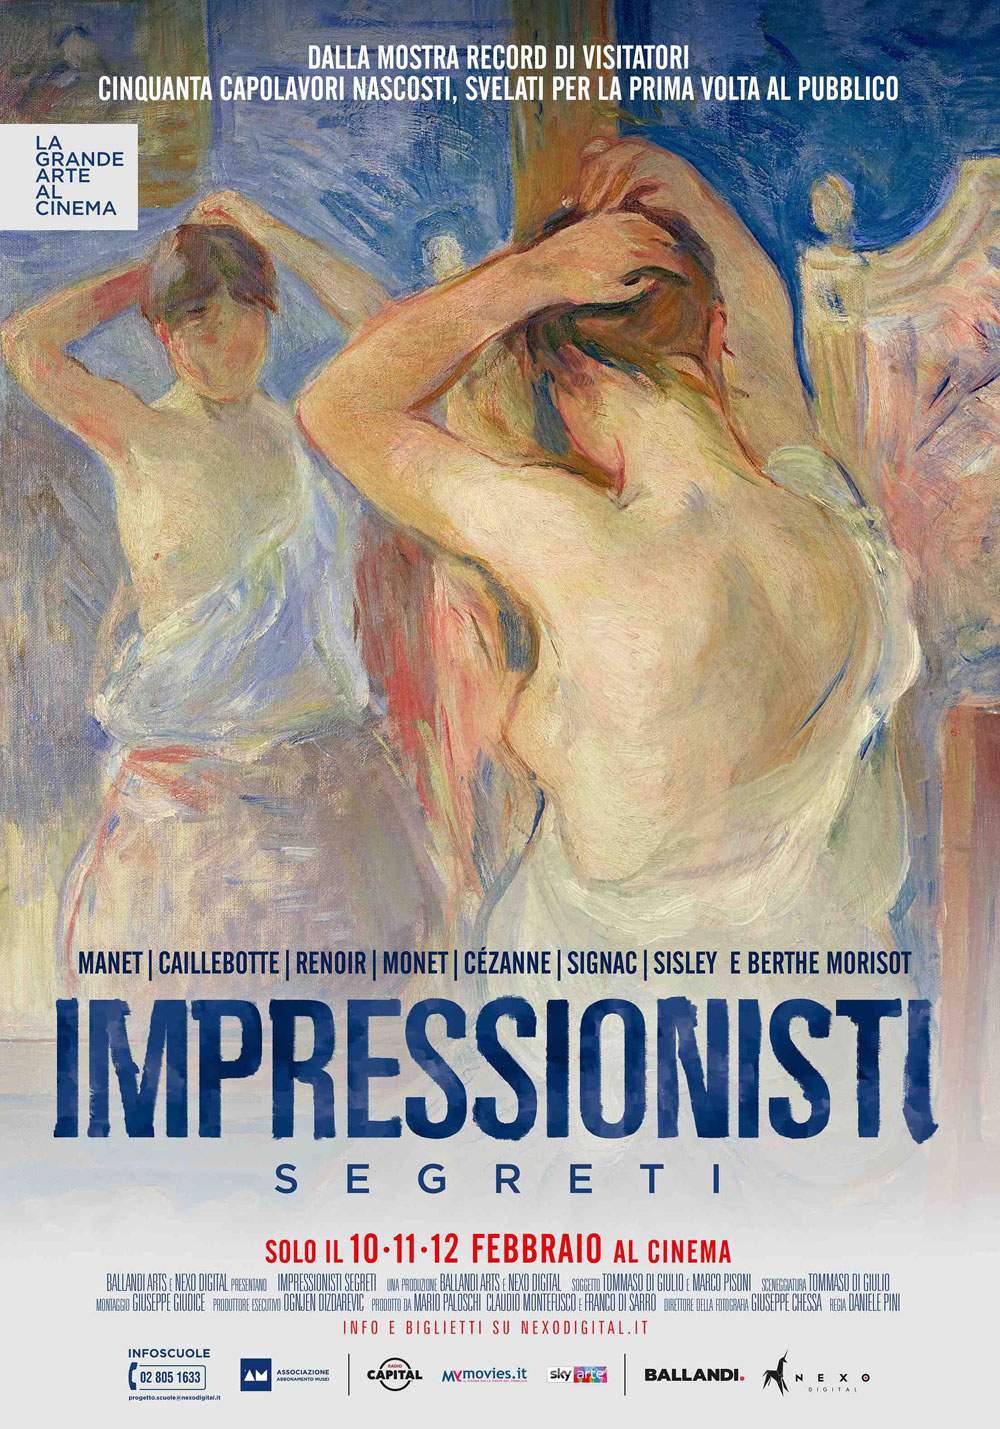 Secret impressionists at the cinema. February 10, 11 and 12, 2020 only